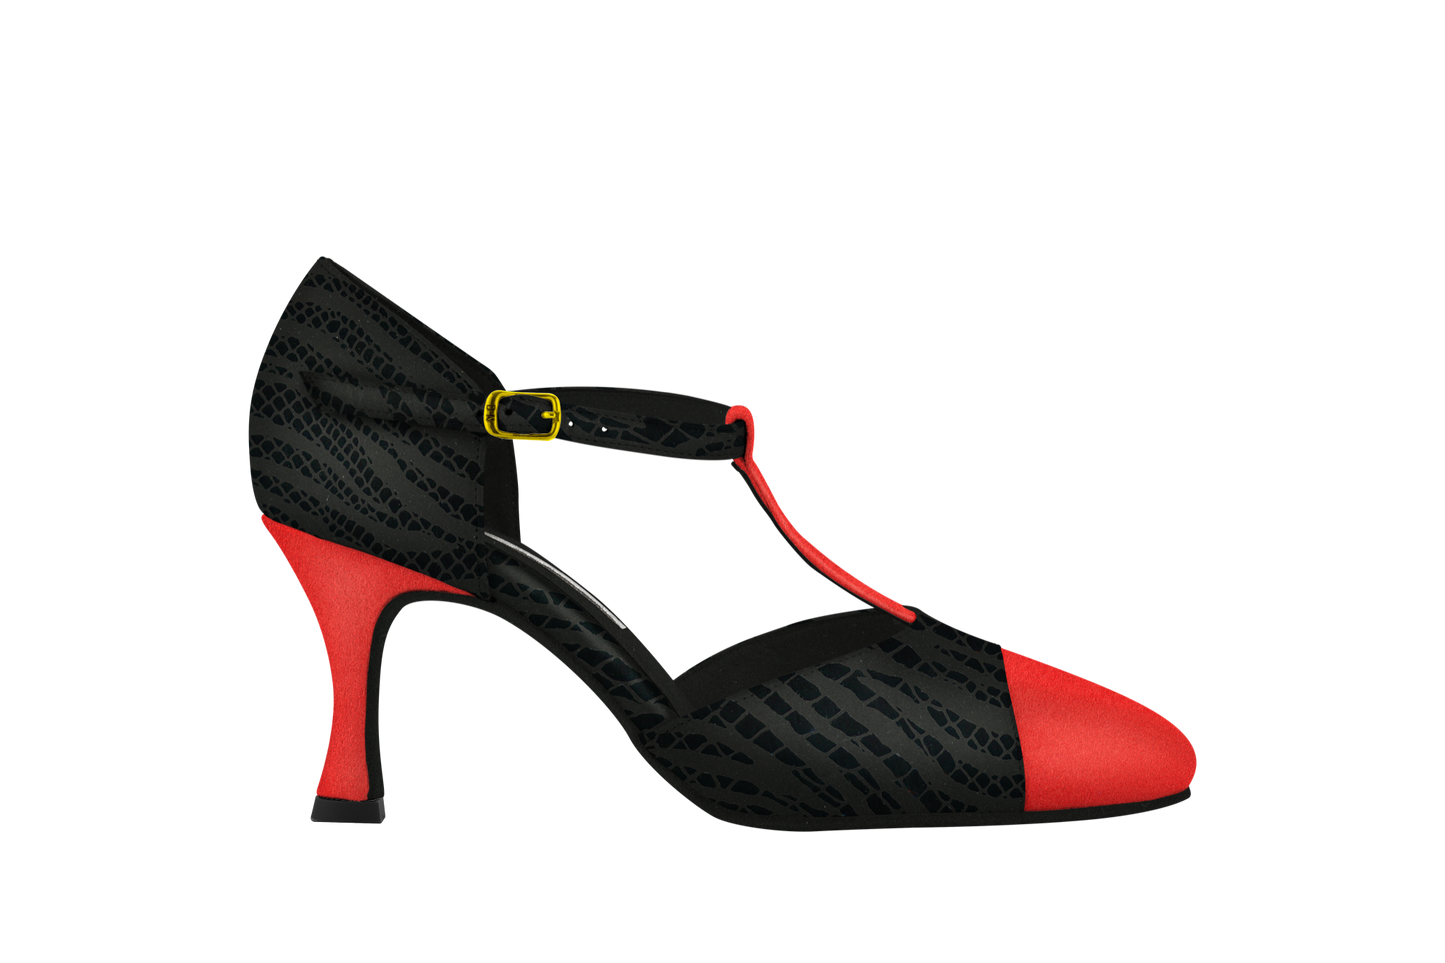 Dance Naturals 730 Marta Red Suede/Black Suede Printed Pointed Toe Ballroom Dance Shoe with T-Bar Strap